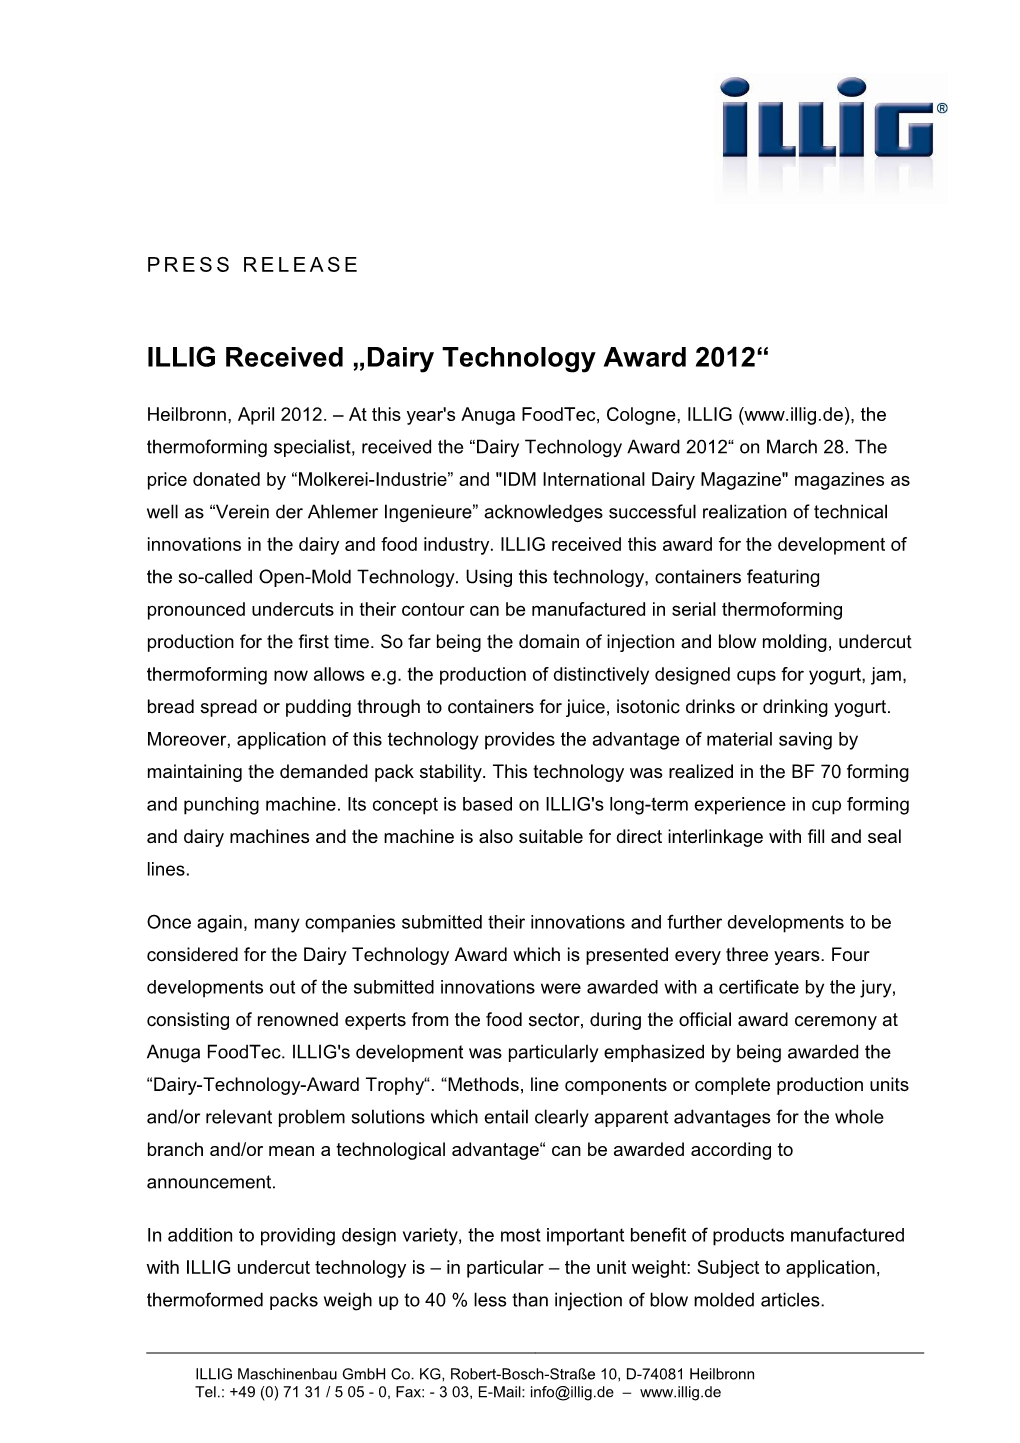 ILLIG Received Dairy Technology Award 2012